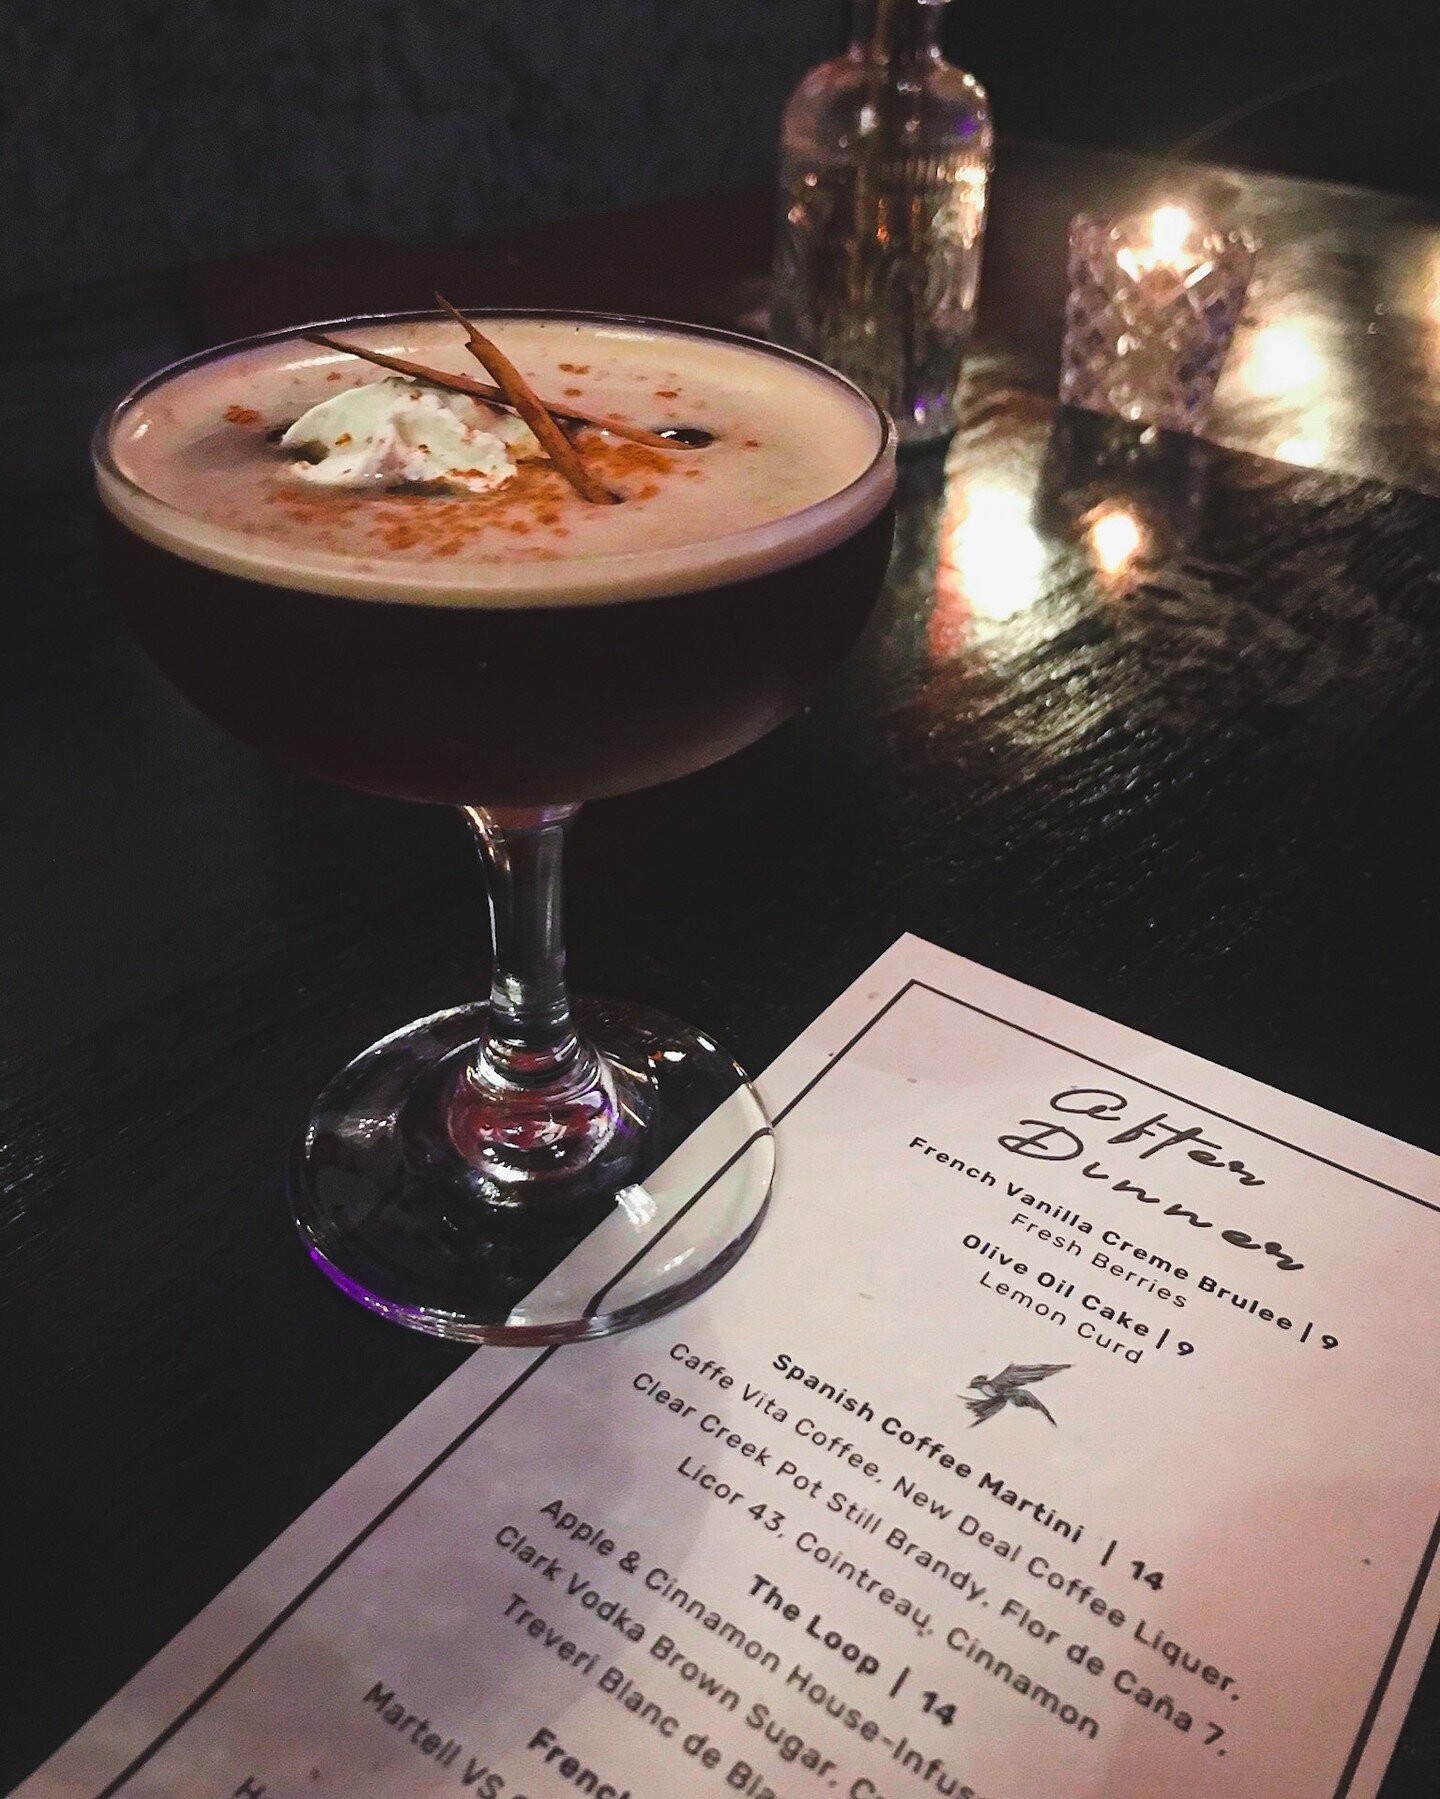 A cocktail hold you over until the weekend. ✨

Spanish Coffee Martini |

Caffe vita coffee, new deal coffee liqueur, clear creek pot still brandy, flor de ca&ntilde;a 7, licor 43, chocolate bitters, cointreau, whipped star, cinnamon.

#mixology #cock